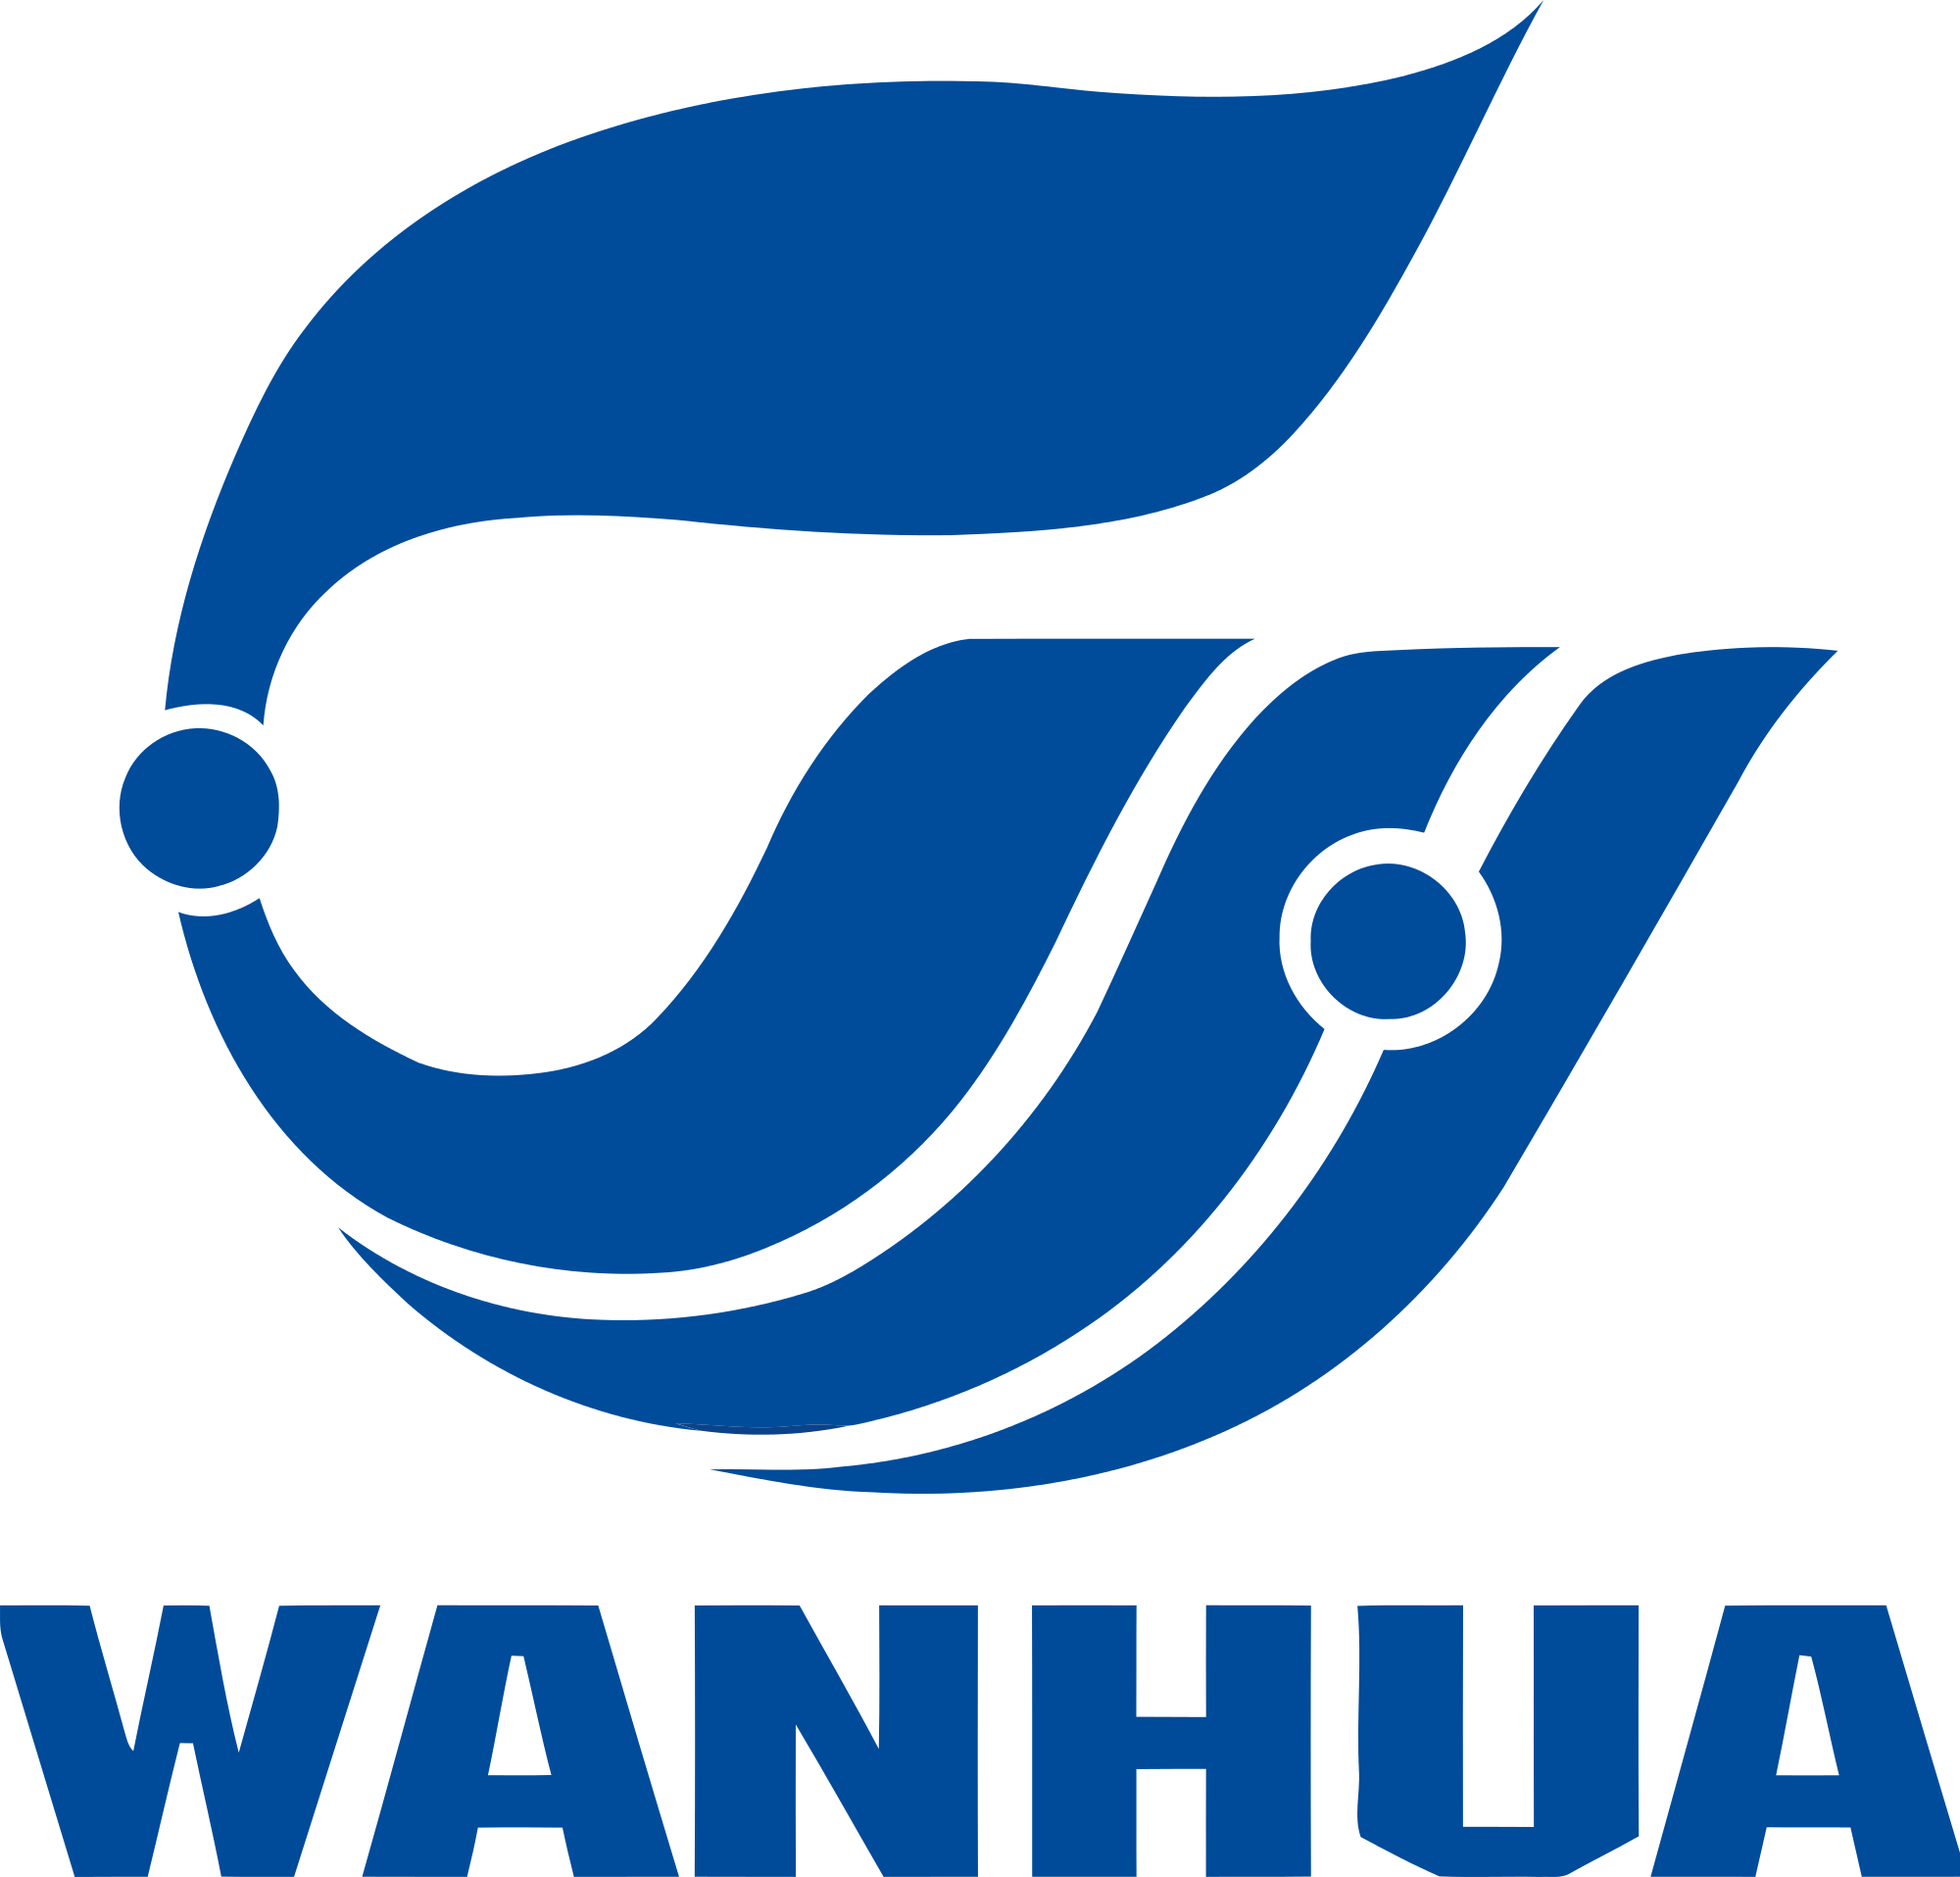 As A Global Chemical Group With Its Awareness Of Its - Wanhua (2000x1915)